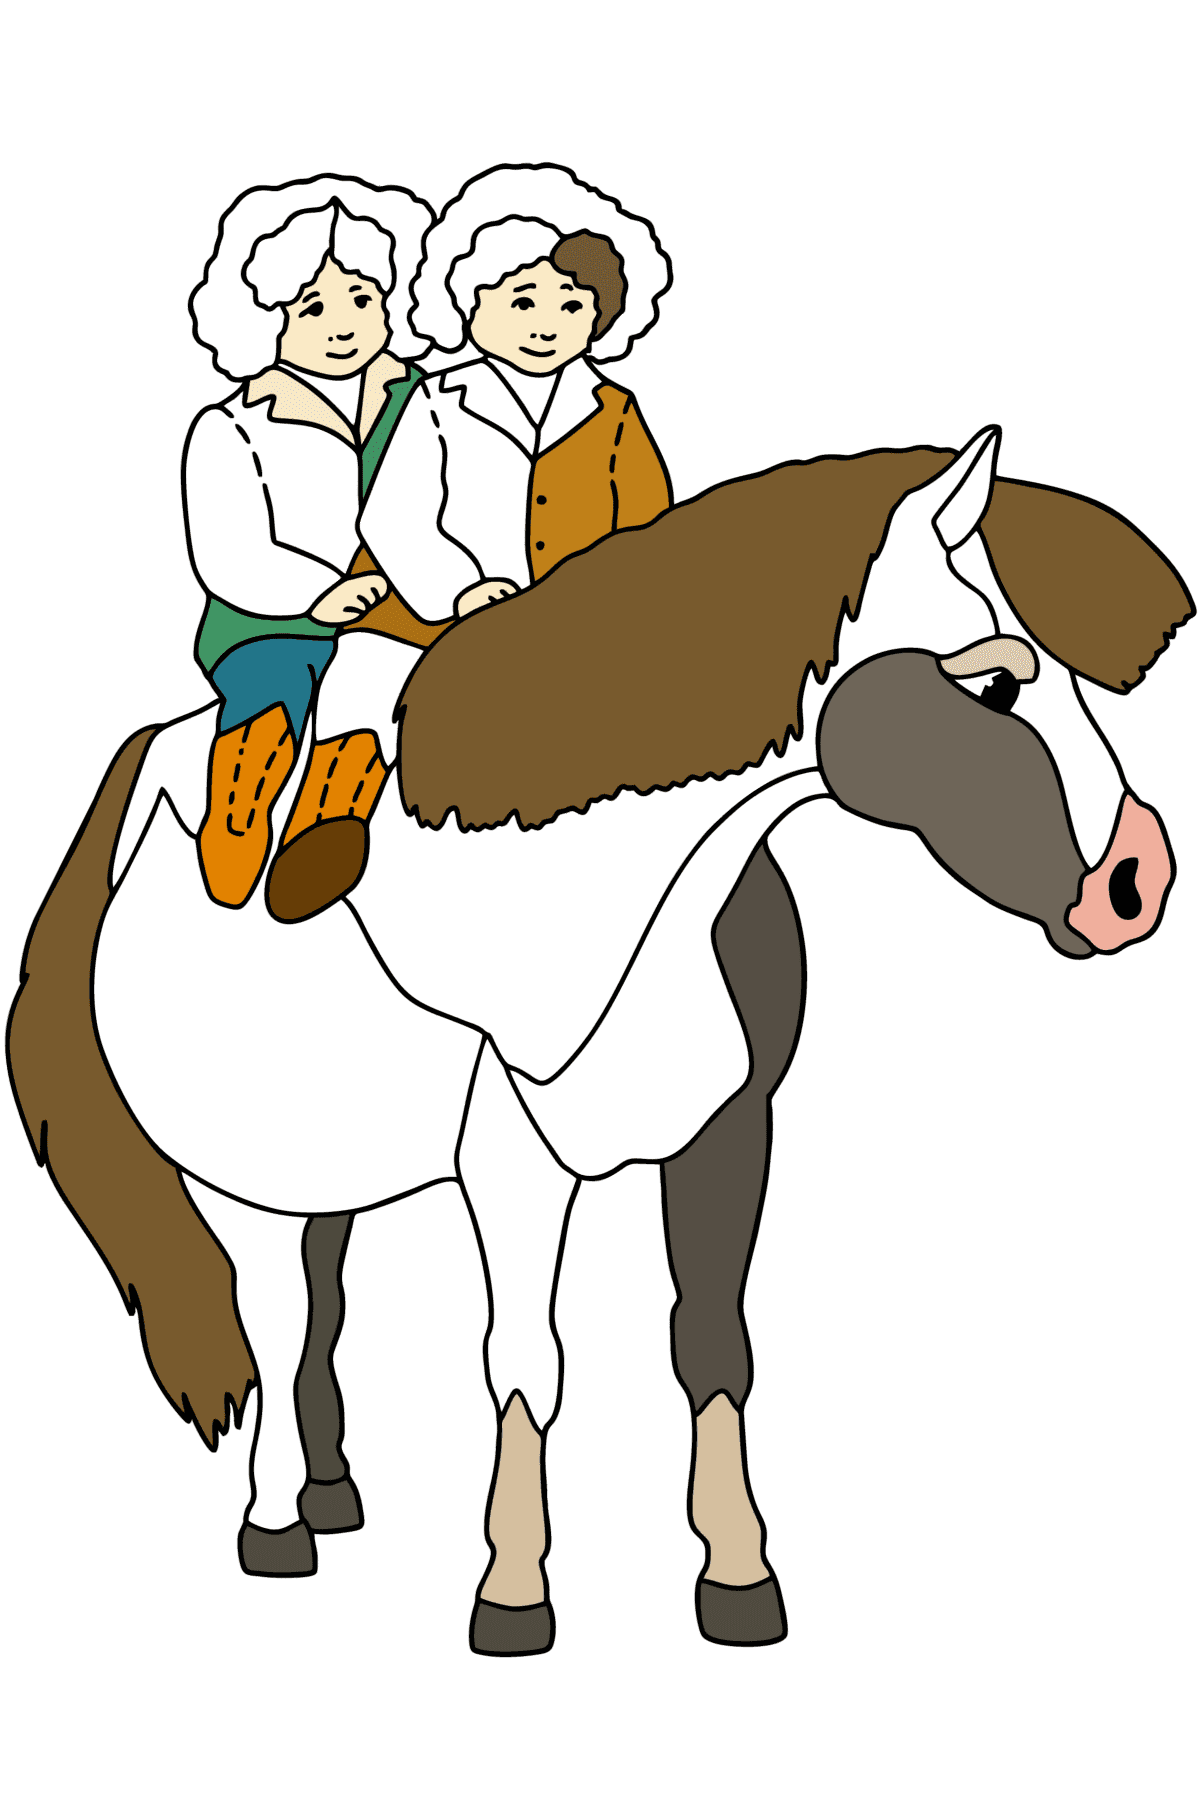 Kids ride pony сoloring page - Coloring Pages for Kids